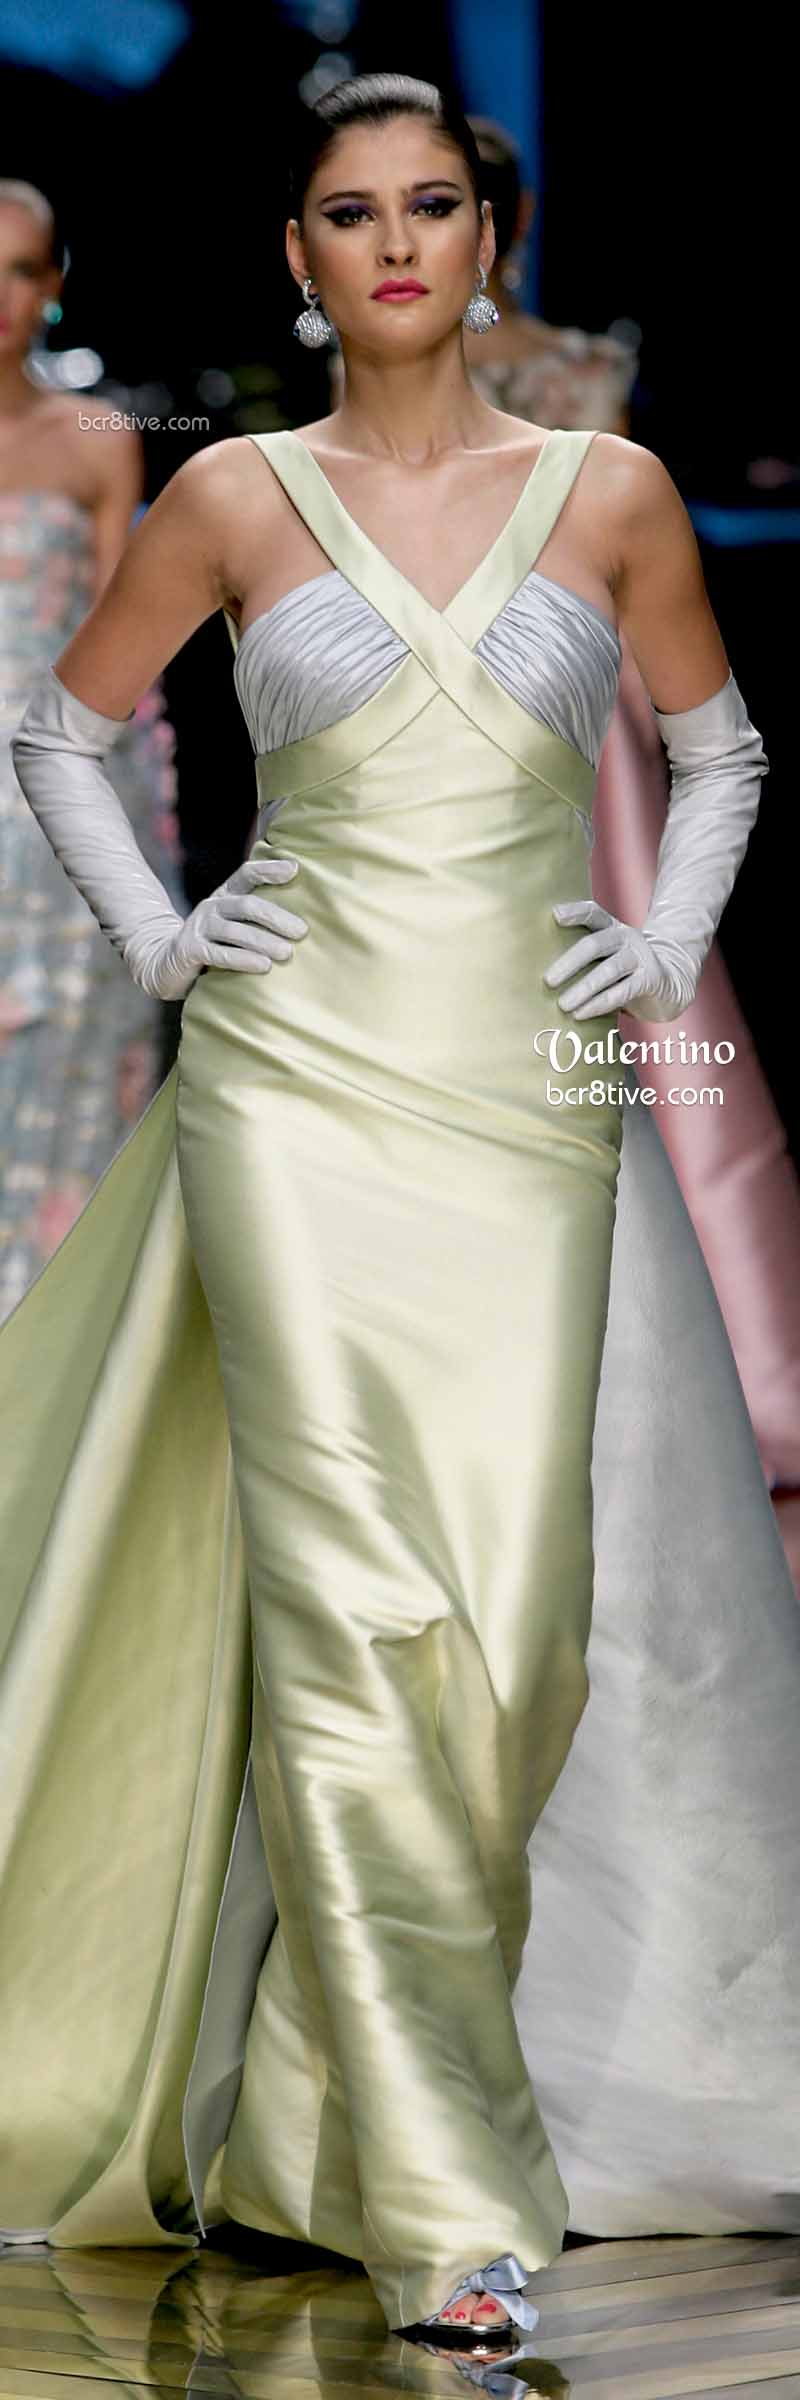 Valentino Celery Criss Cross Styled Evening Gown